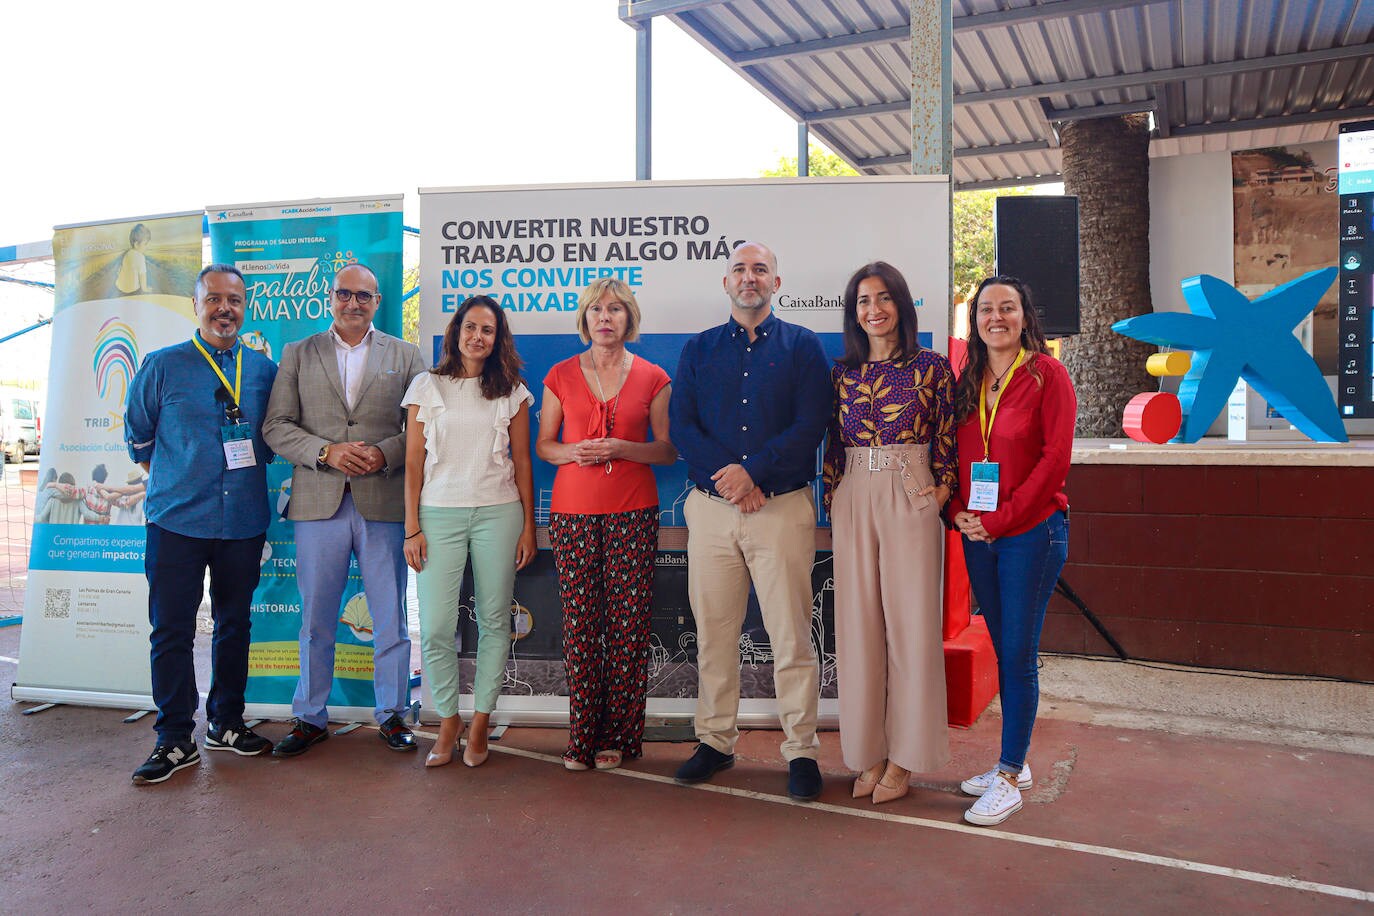 Representatives of both town councils, together with the person in charge of Social Action at CaixaBank and the coordinator of Trib-Arte, during the closing of the program with the elderly who have participated in the workshops. 